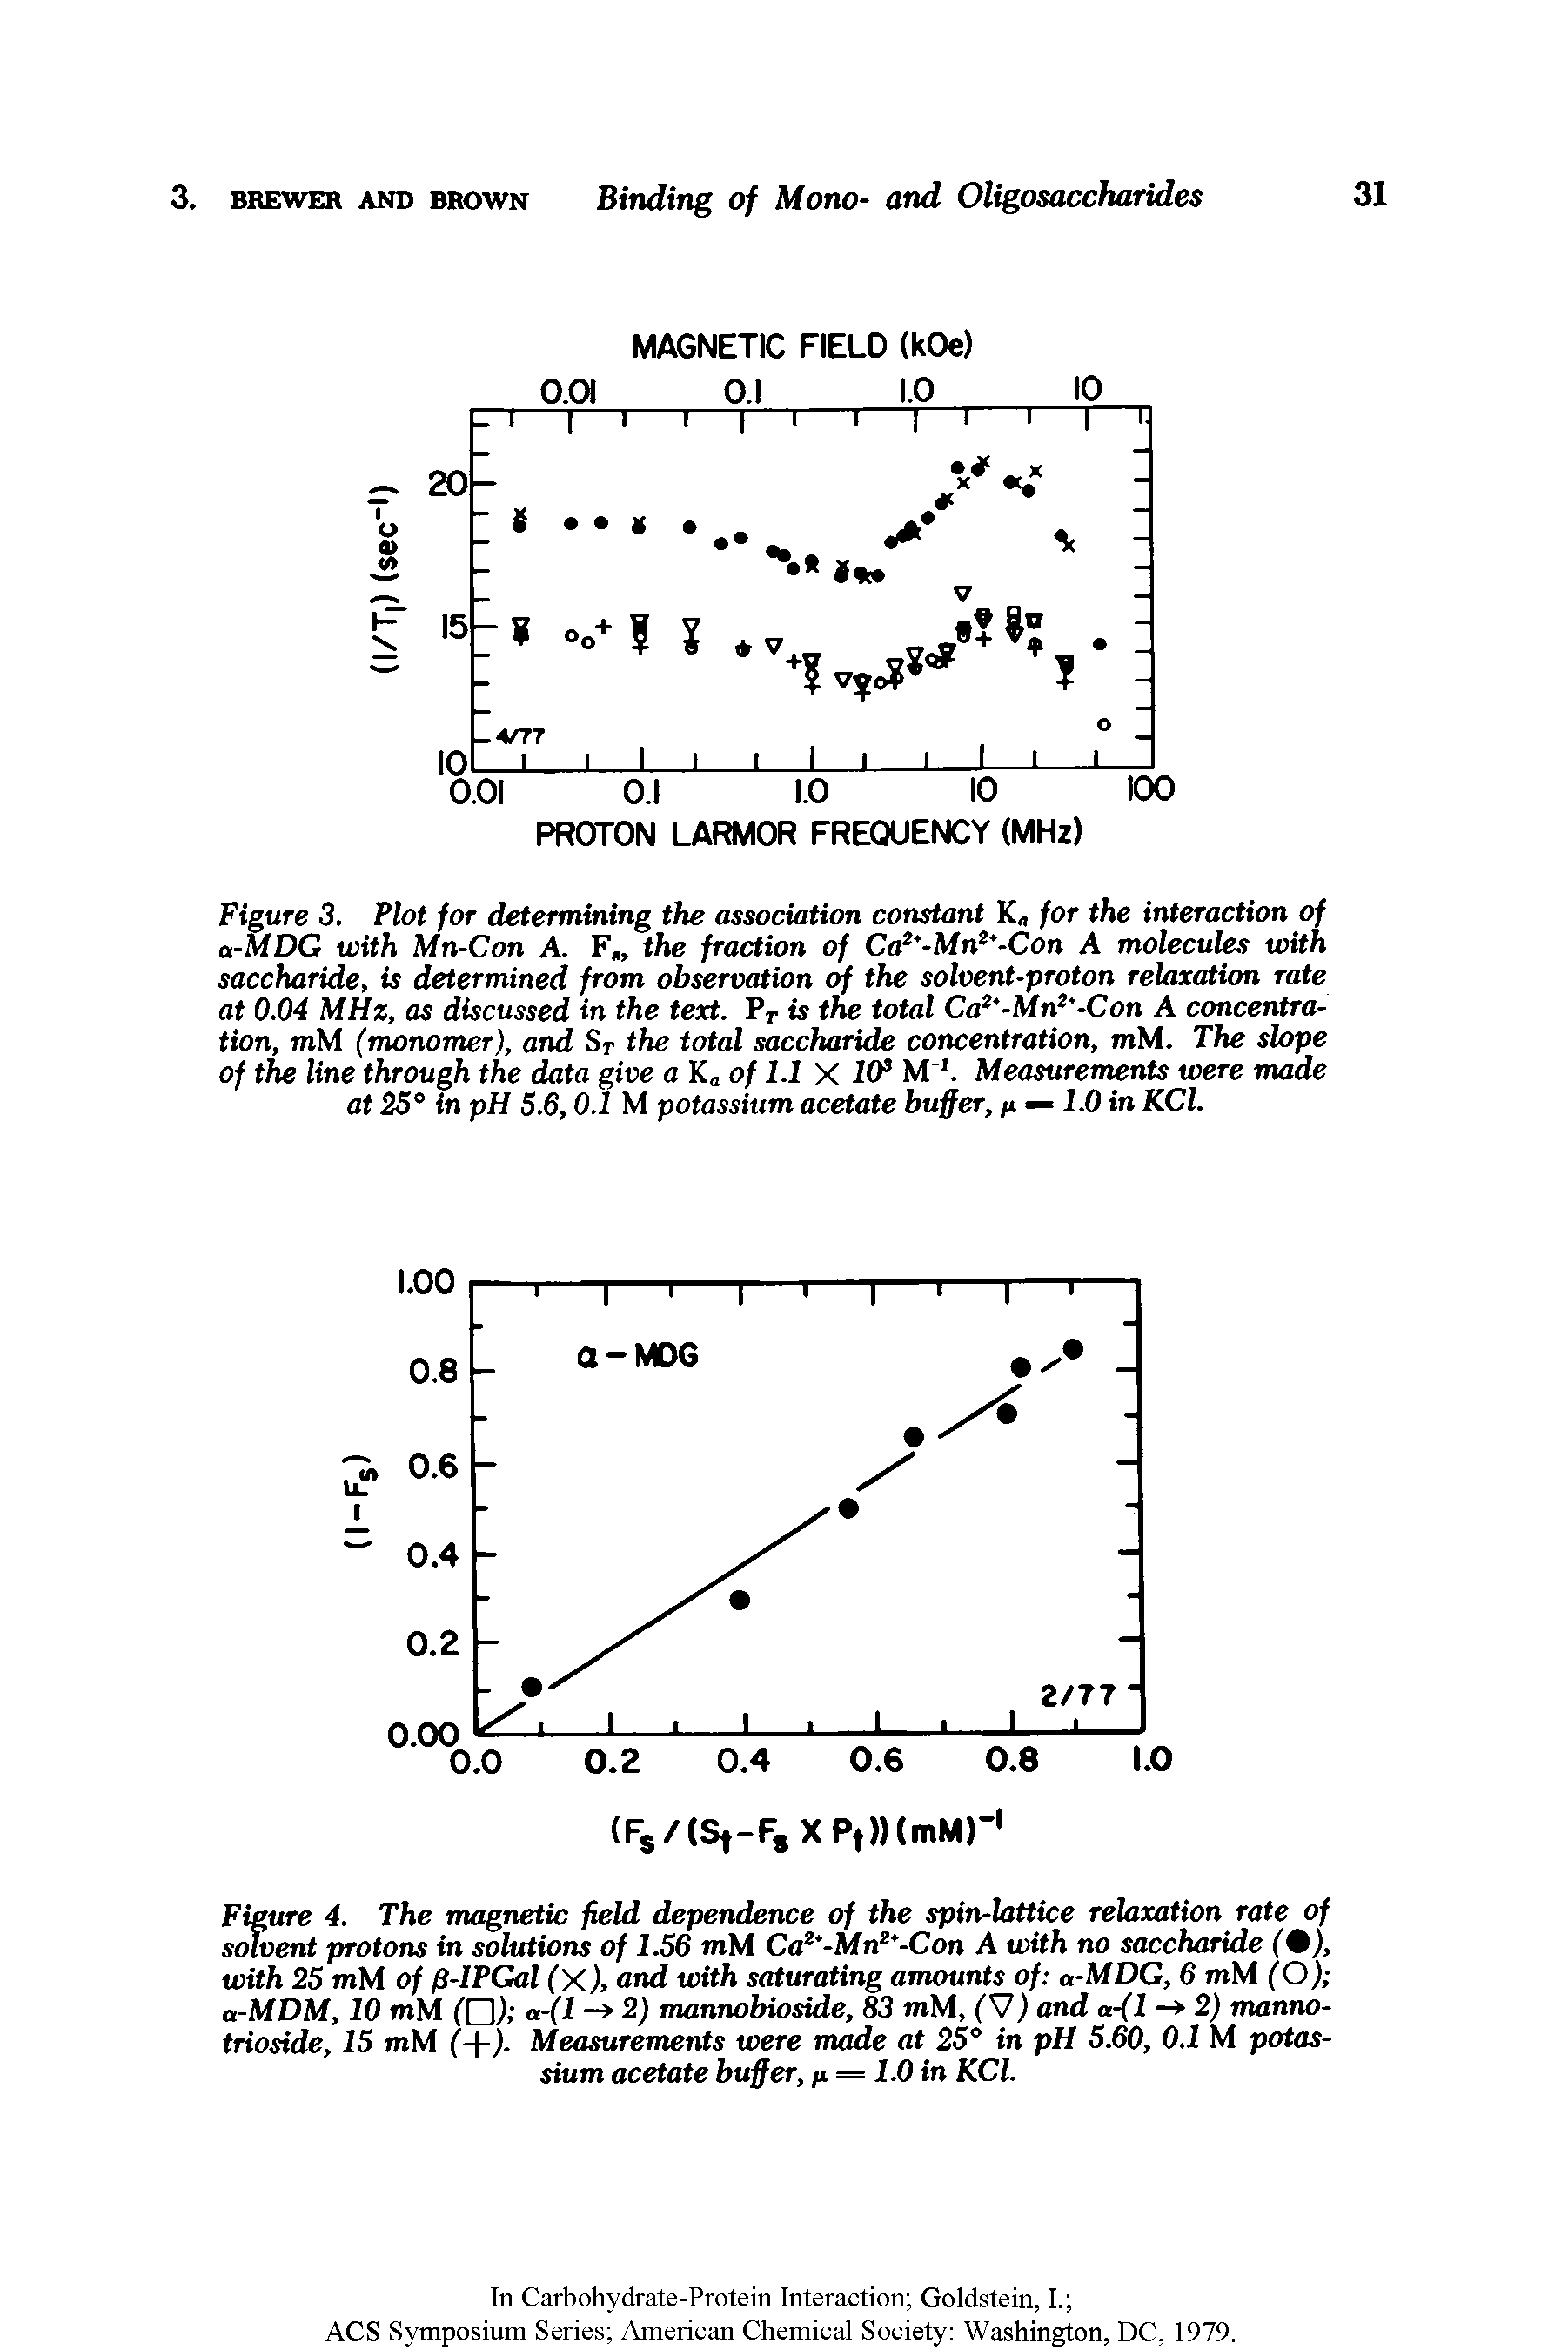 Figure 3. Plot for determining the association constant K for the interaction of a-MDG with Mn-Con A. F the fraction of Ca2 -Mn2 -Con A molecules with saccharide, is determined from observation of the solvent-proton relaxation rate at 0.04 MHz, as discussed in the text. PT is the total Ca2 -Mn2 -Con A concentration, mM (monomer), and ST the total saccharide concentration, mM. The slope of the line through the data give a K of 1.1 X 10s M"1. Measurements were made at 25° in pH 5.6,0.1 M potassium acetate buffer, n = 1.0 in KCl.